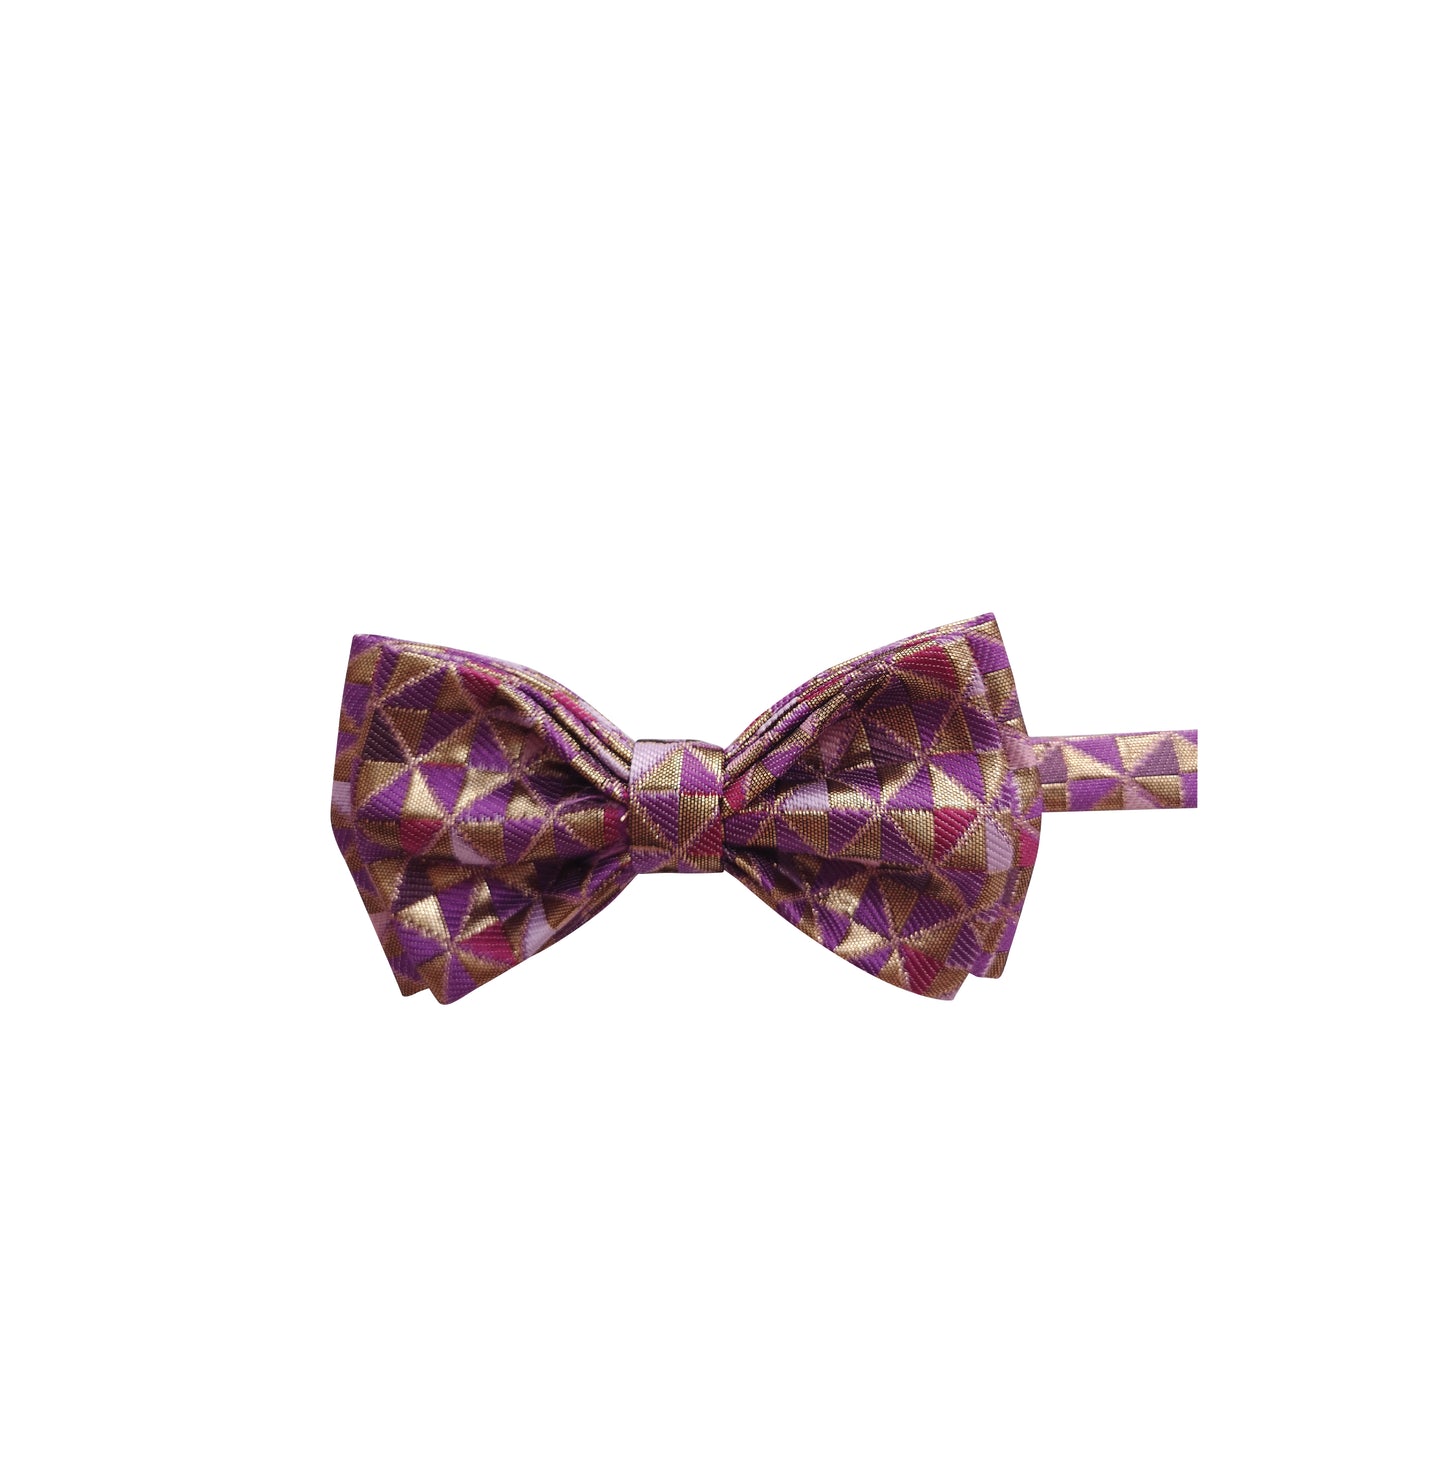 THE GIFFORD P BOWTIE